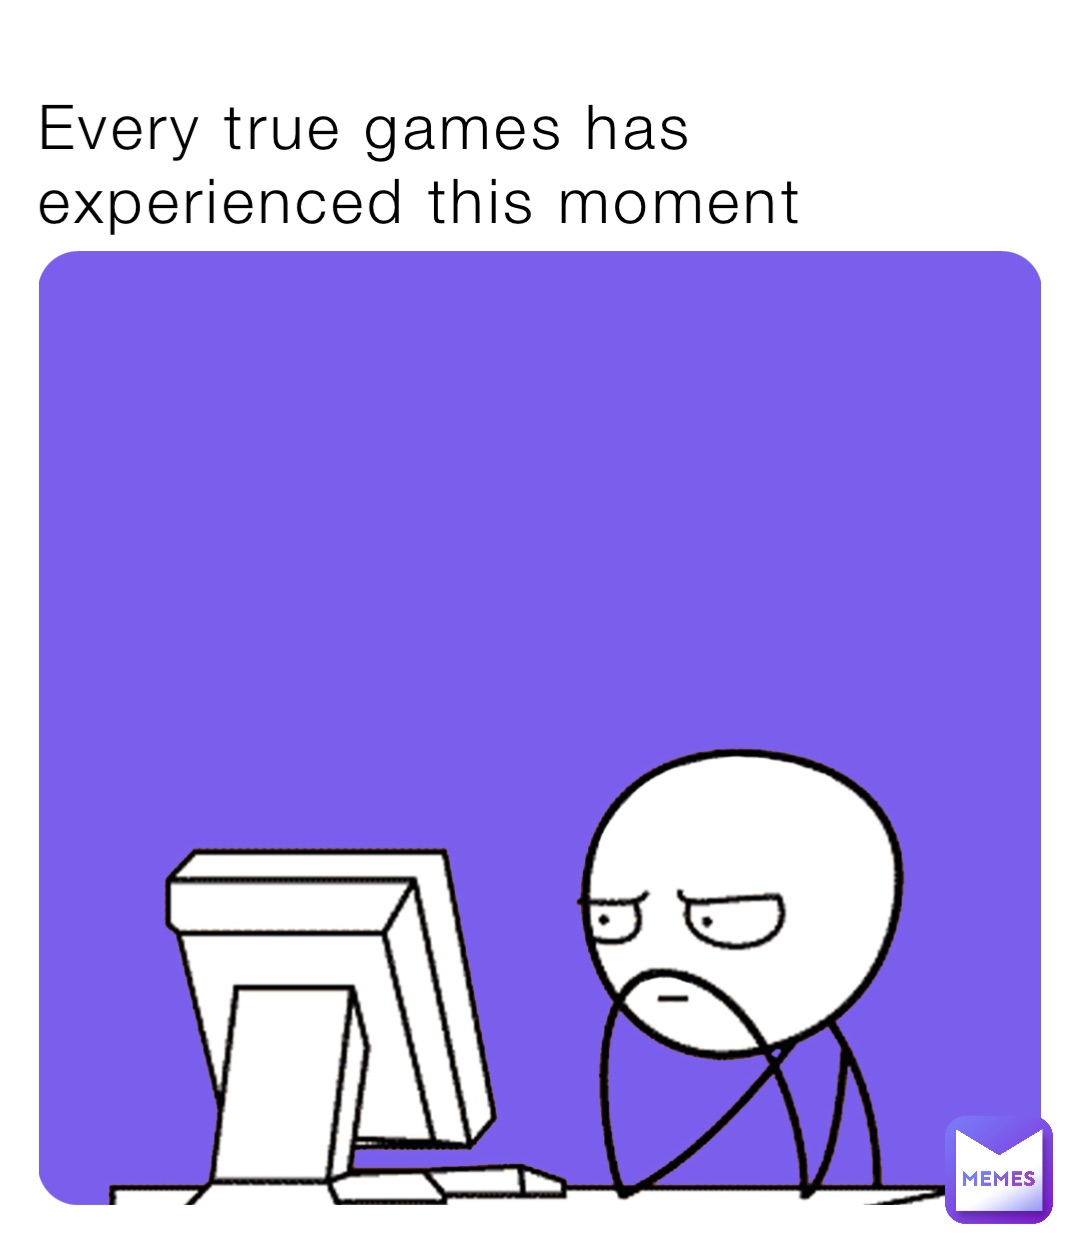 Every true games has experienced this moment